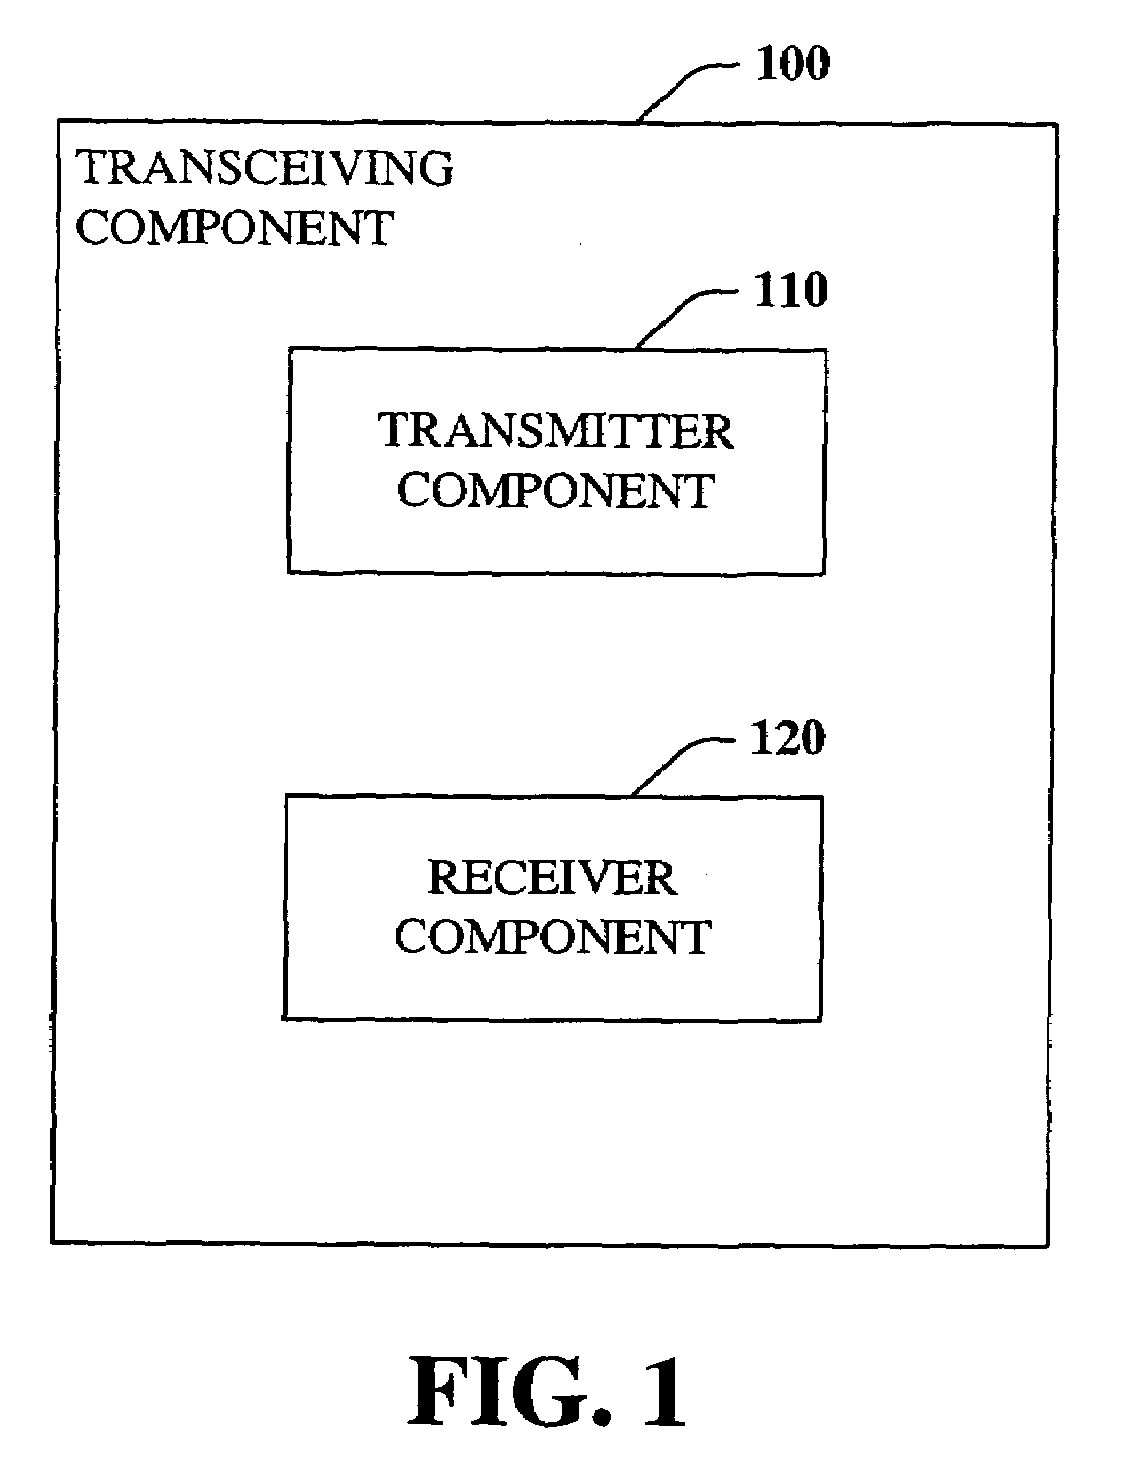 Systems and methods that employ a balanced duplexer